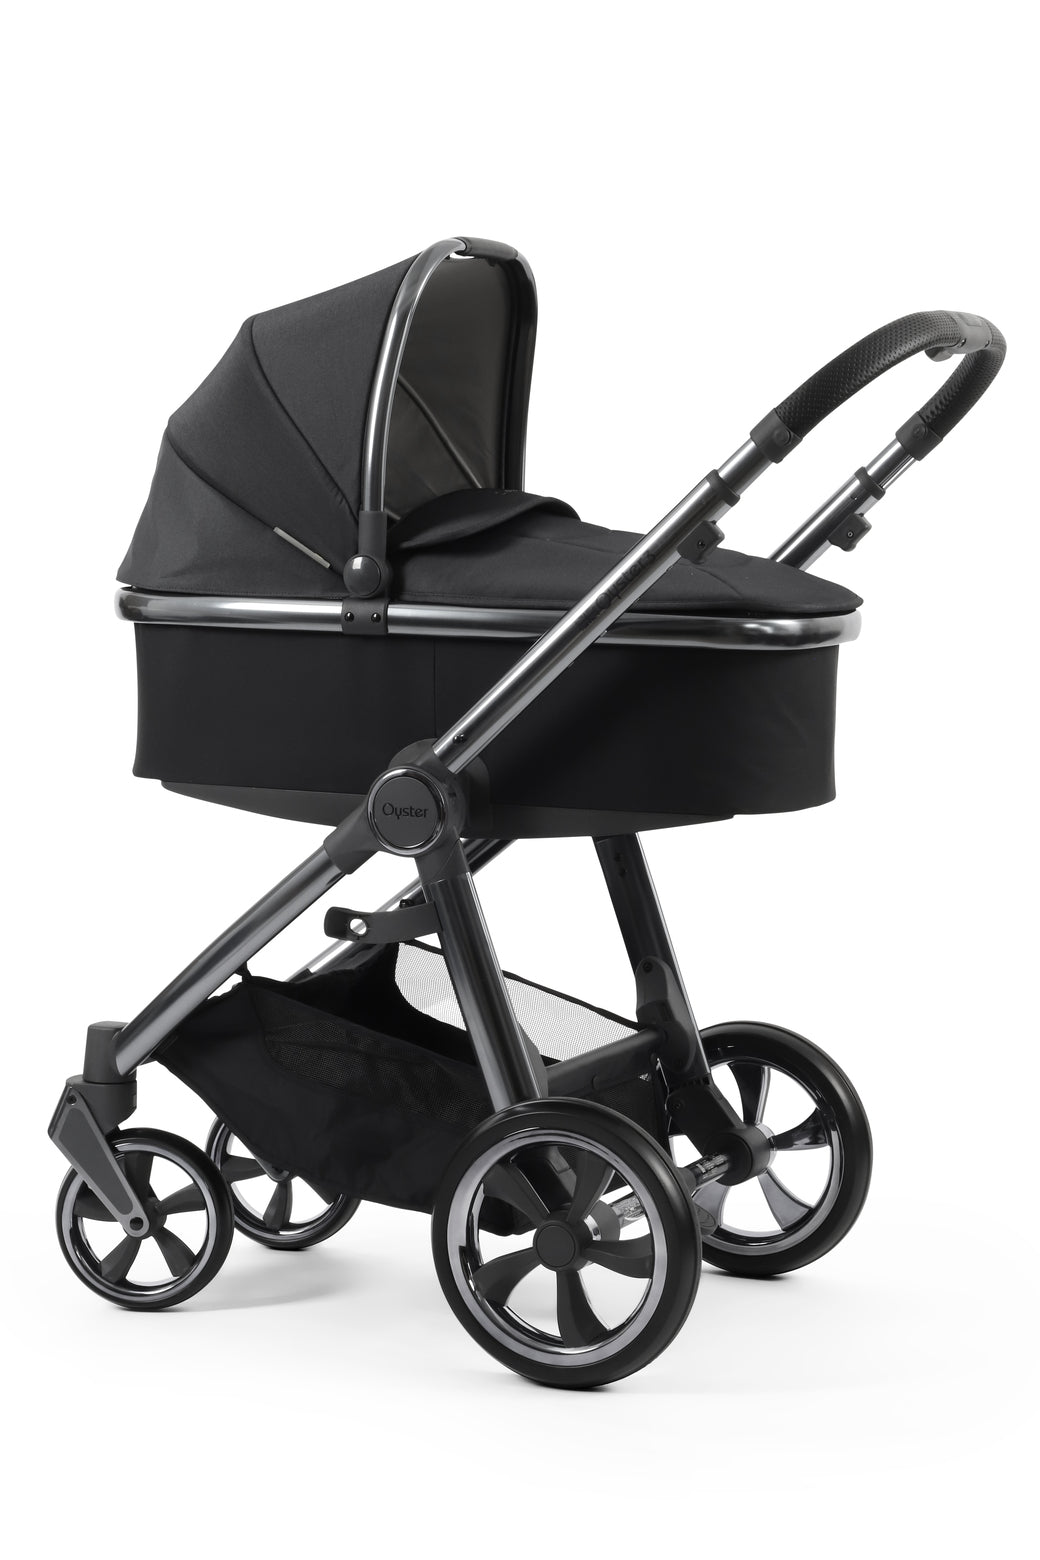 BabyStyle Oyster 3 Carrycot - Carbonite - For Your Little One